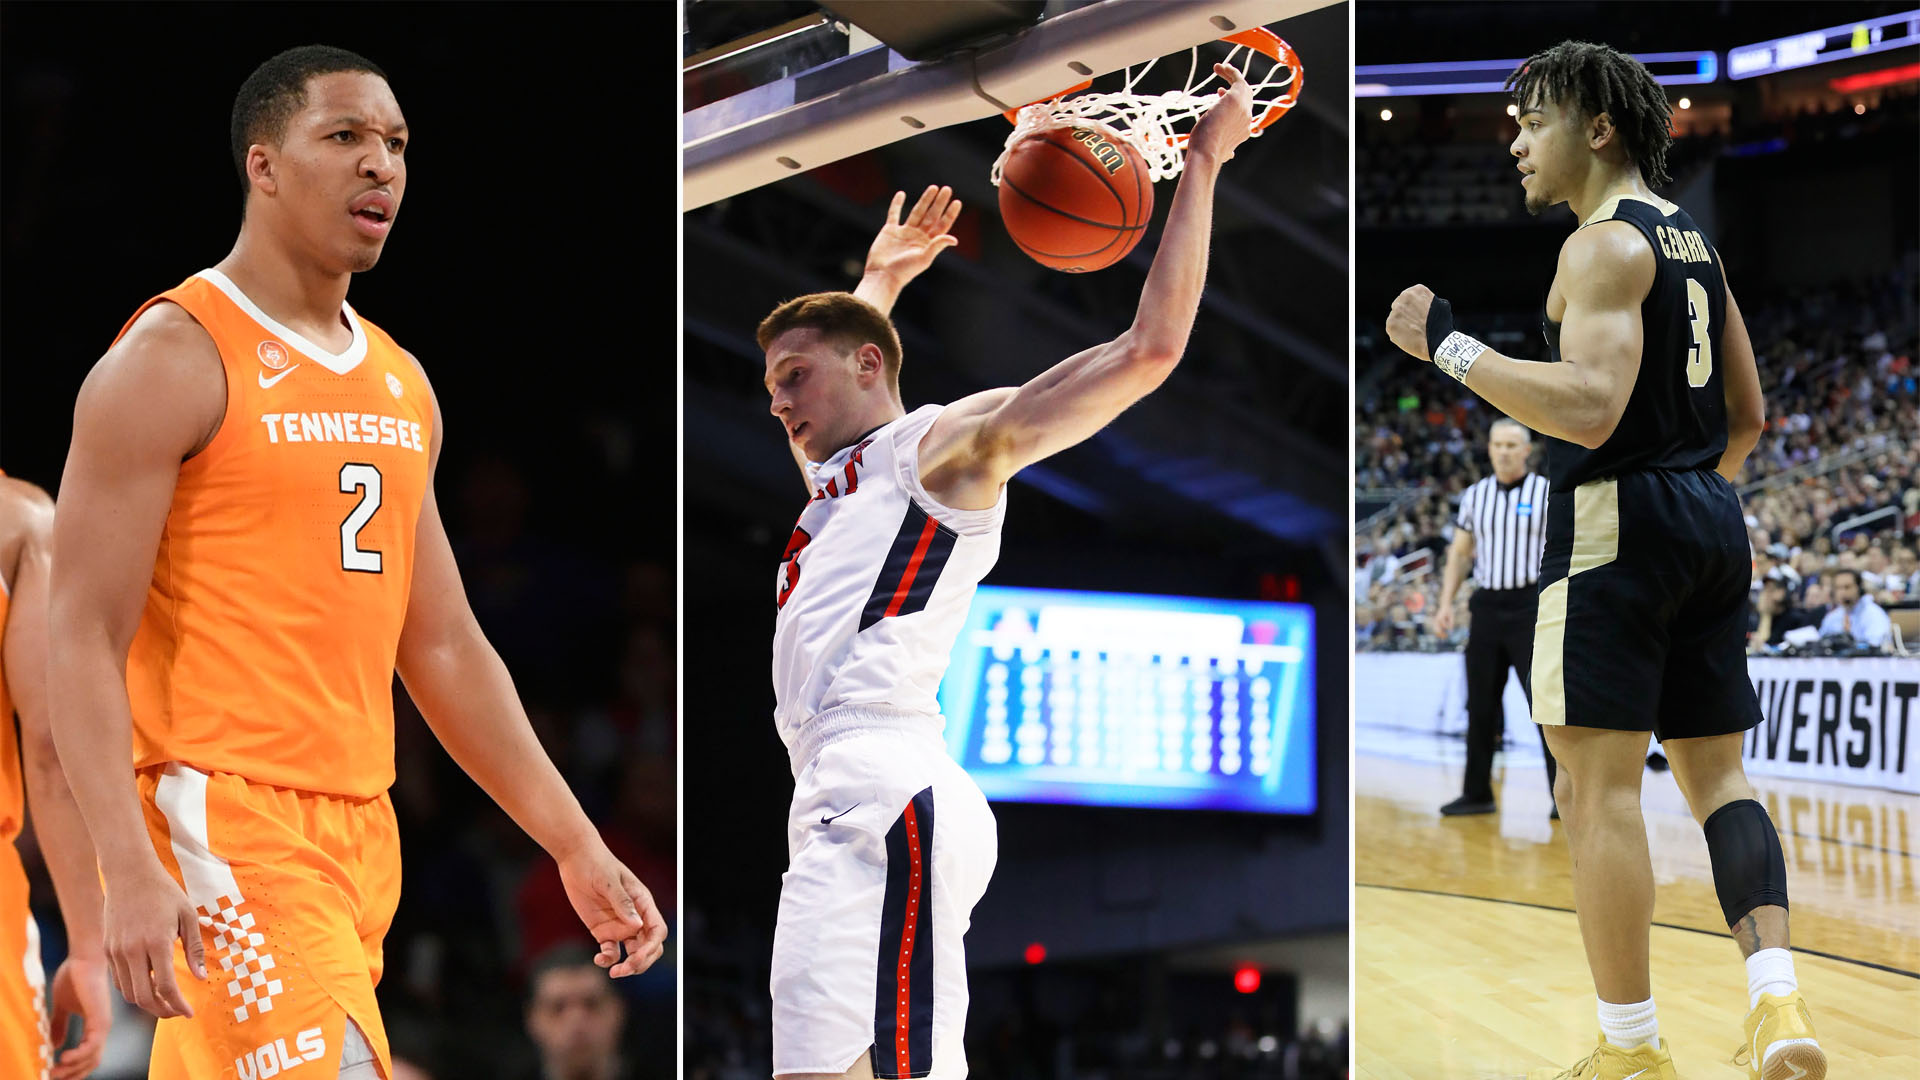 Here are four players who could make an immediate impact in the NBA ahead of the June 20 draft.